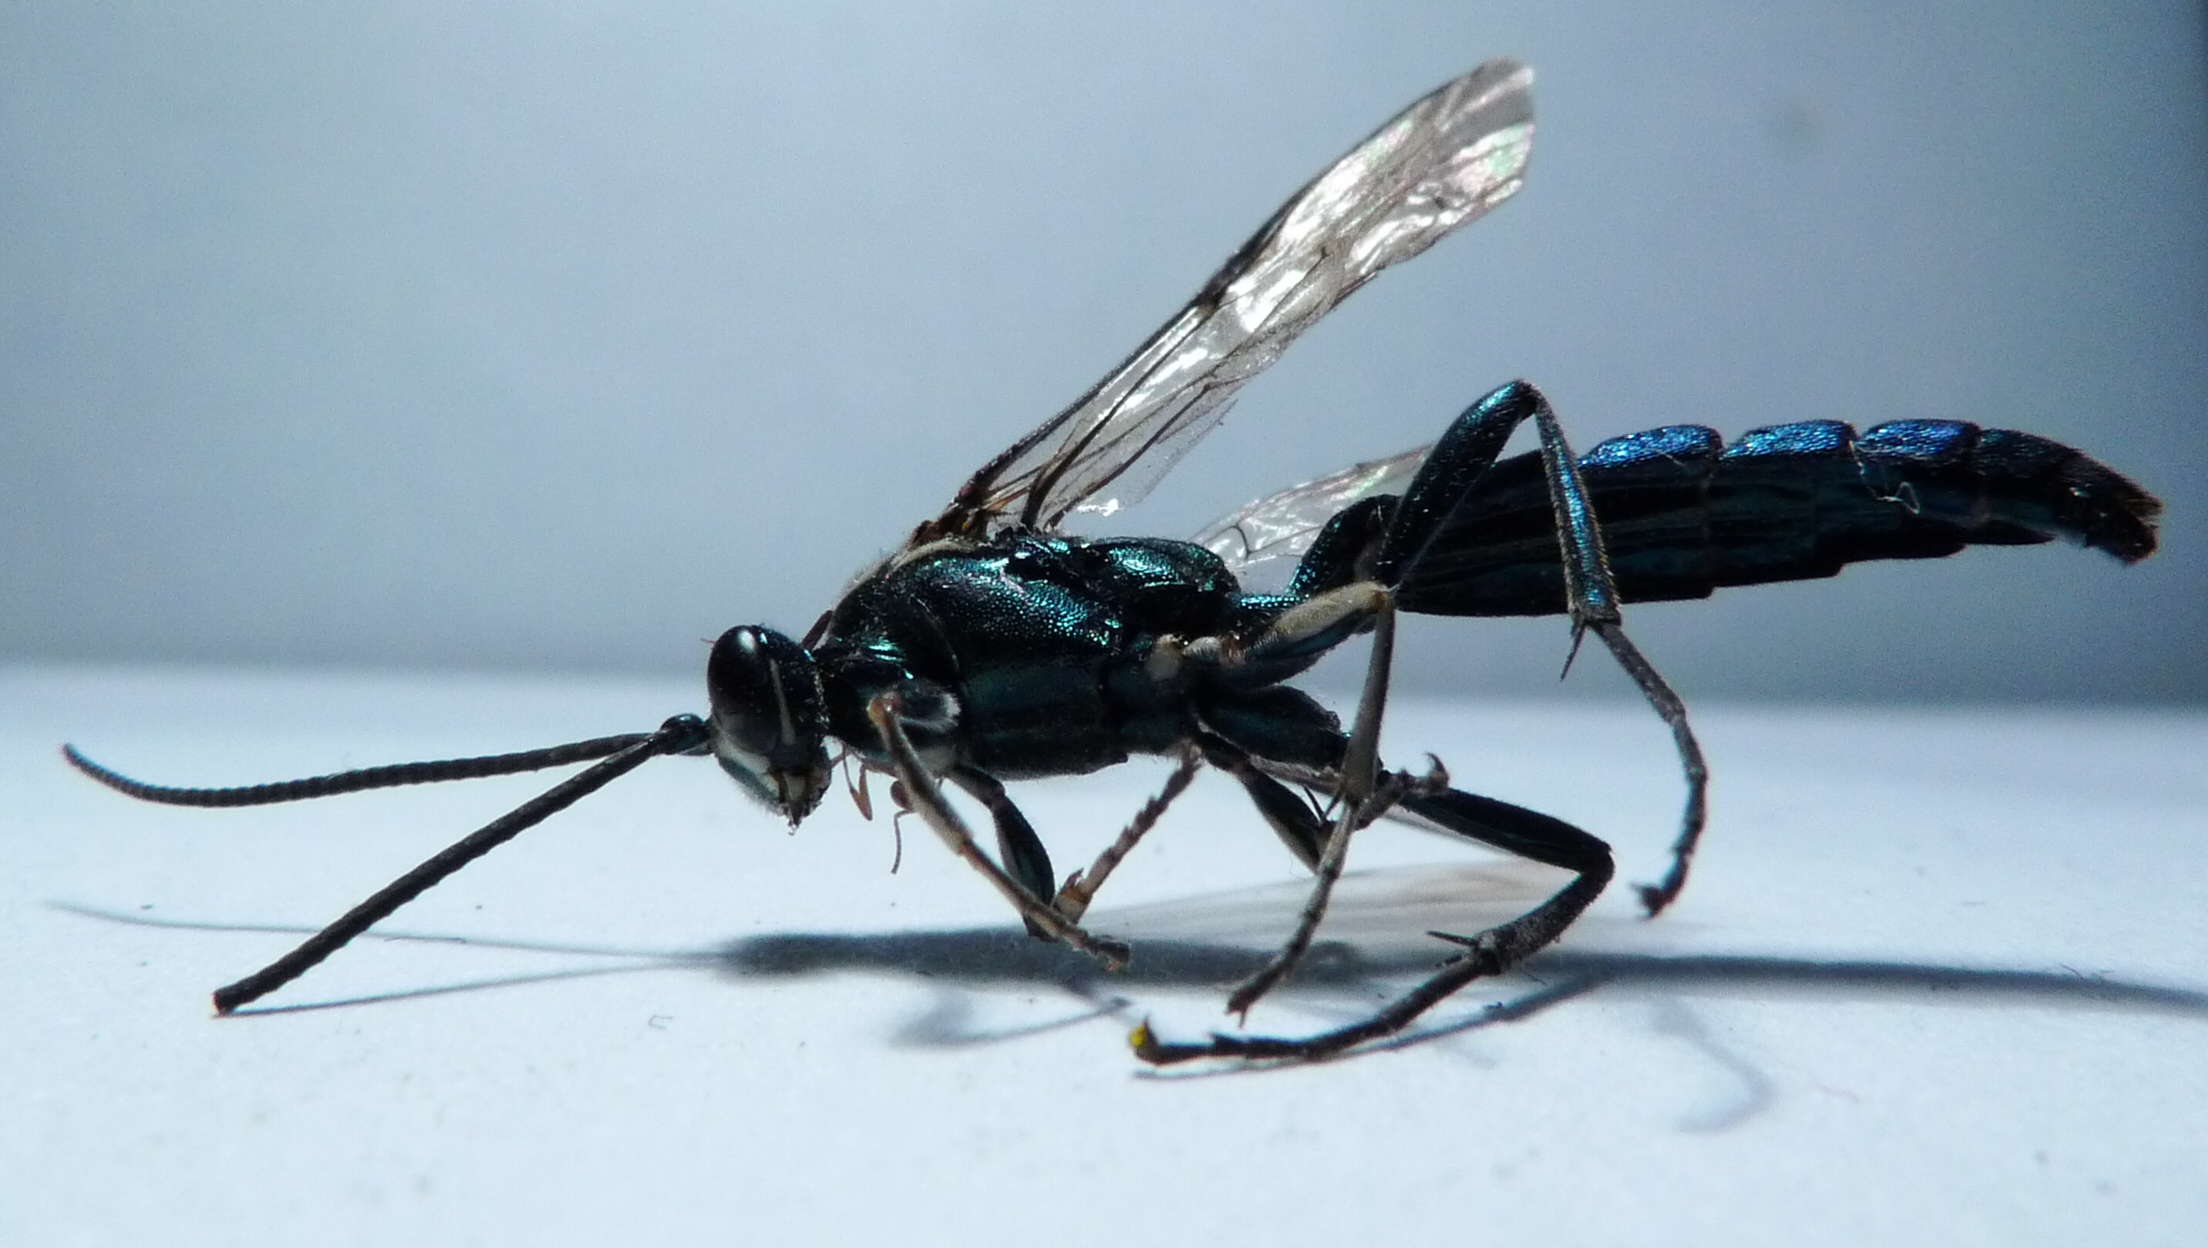 the insect with blue antennae and antennae is sitting on the surface